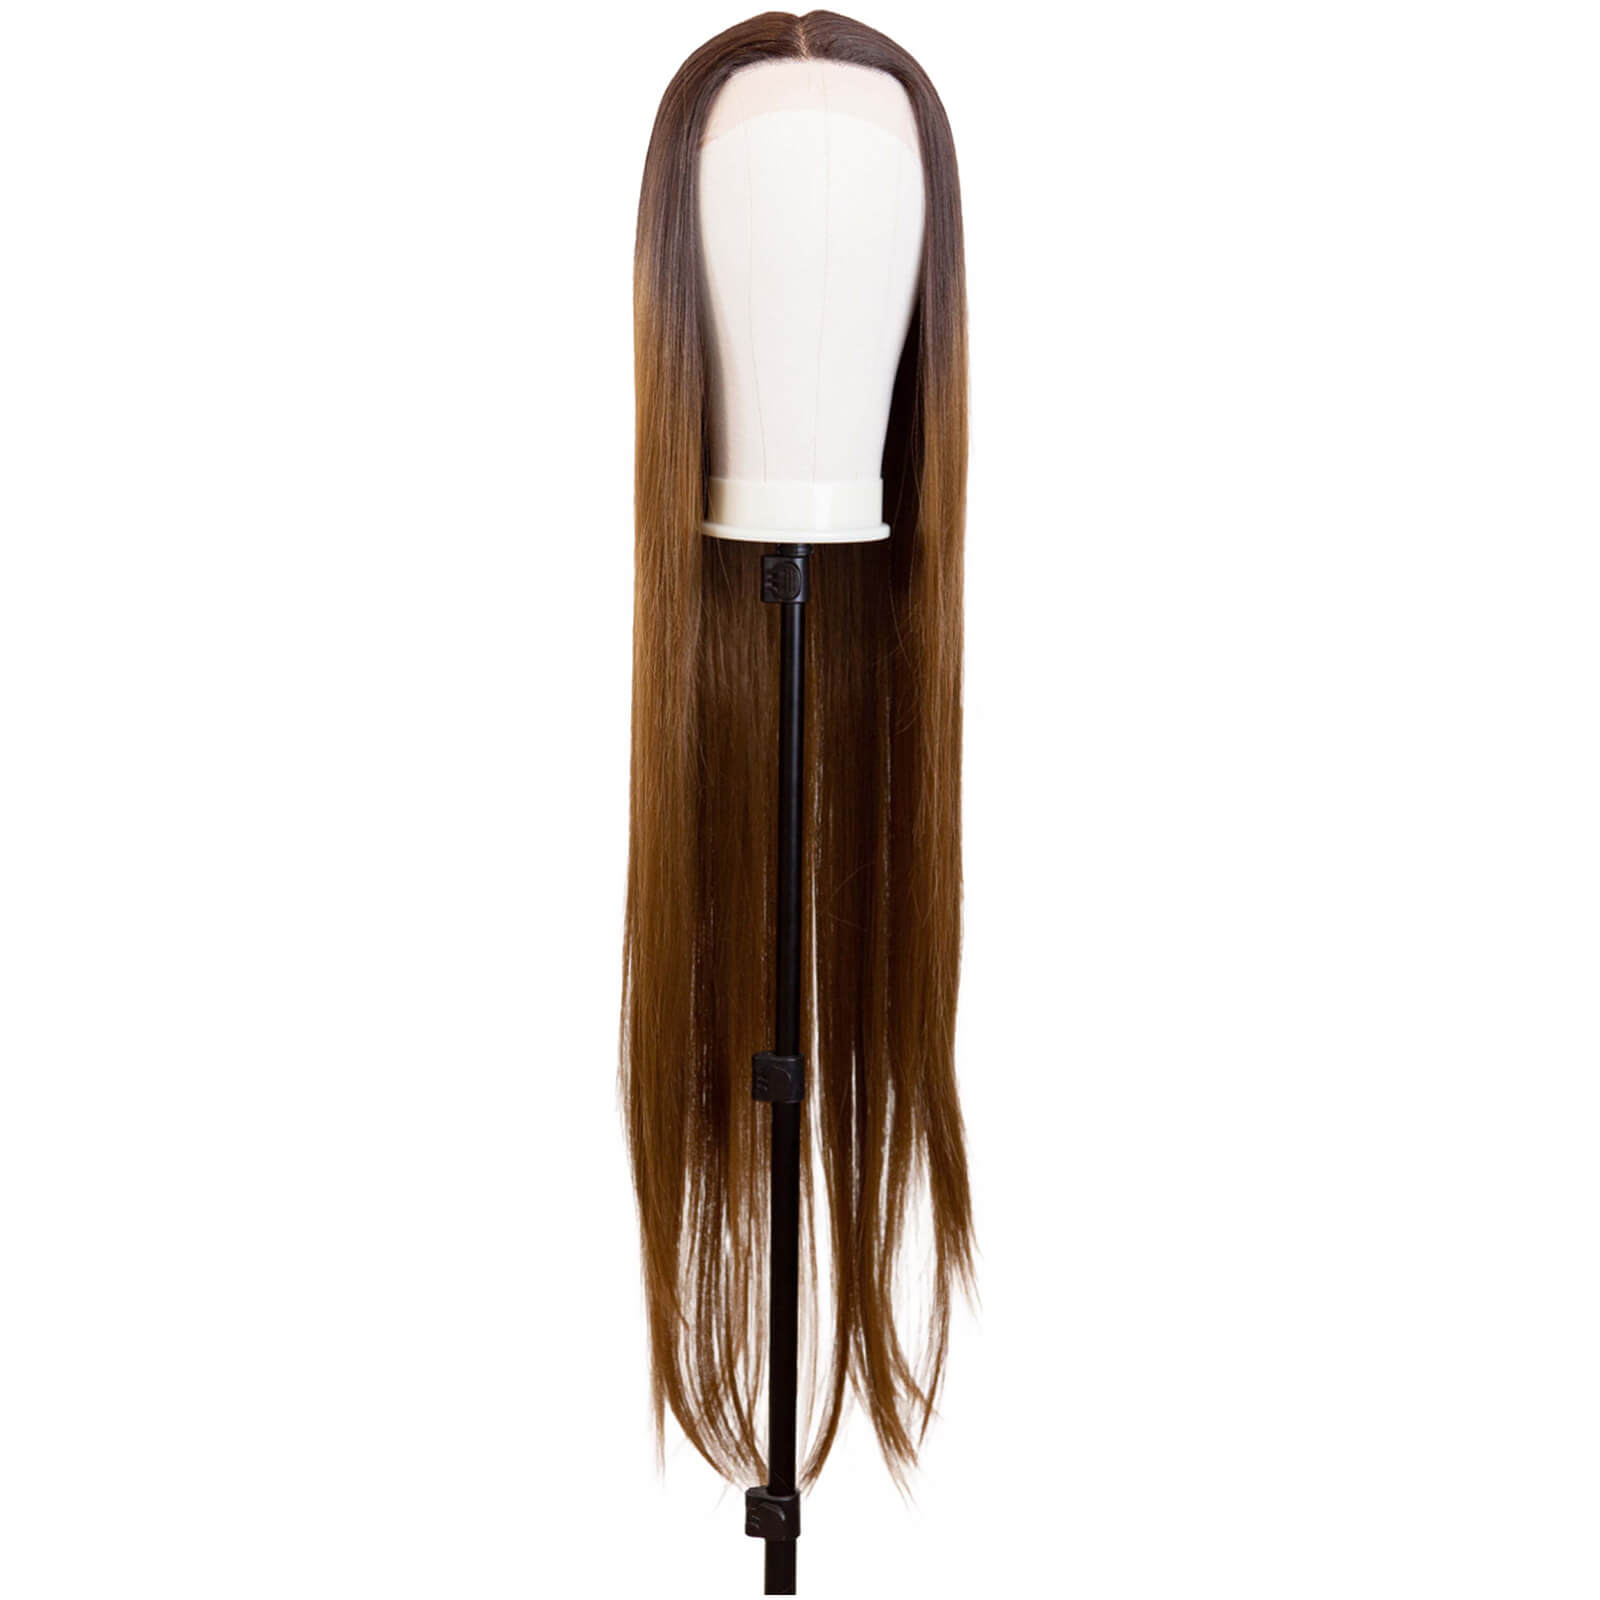 PlsLONDON The Bey Lace Frontal Wig (Various Options) - Walnut